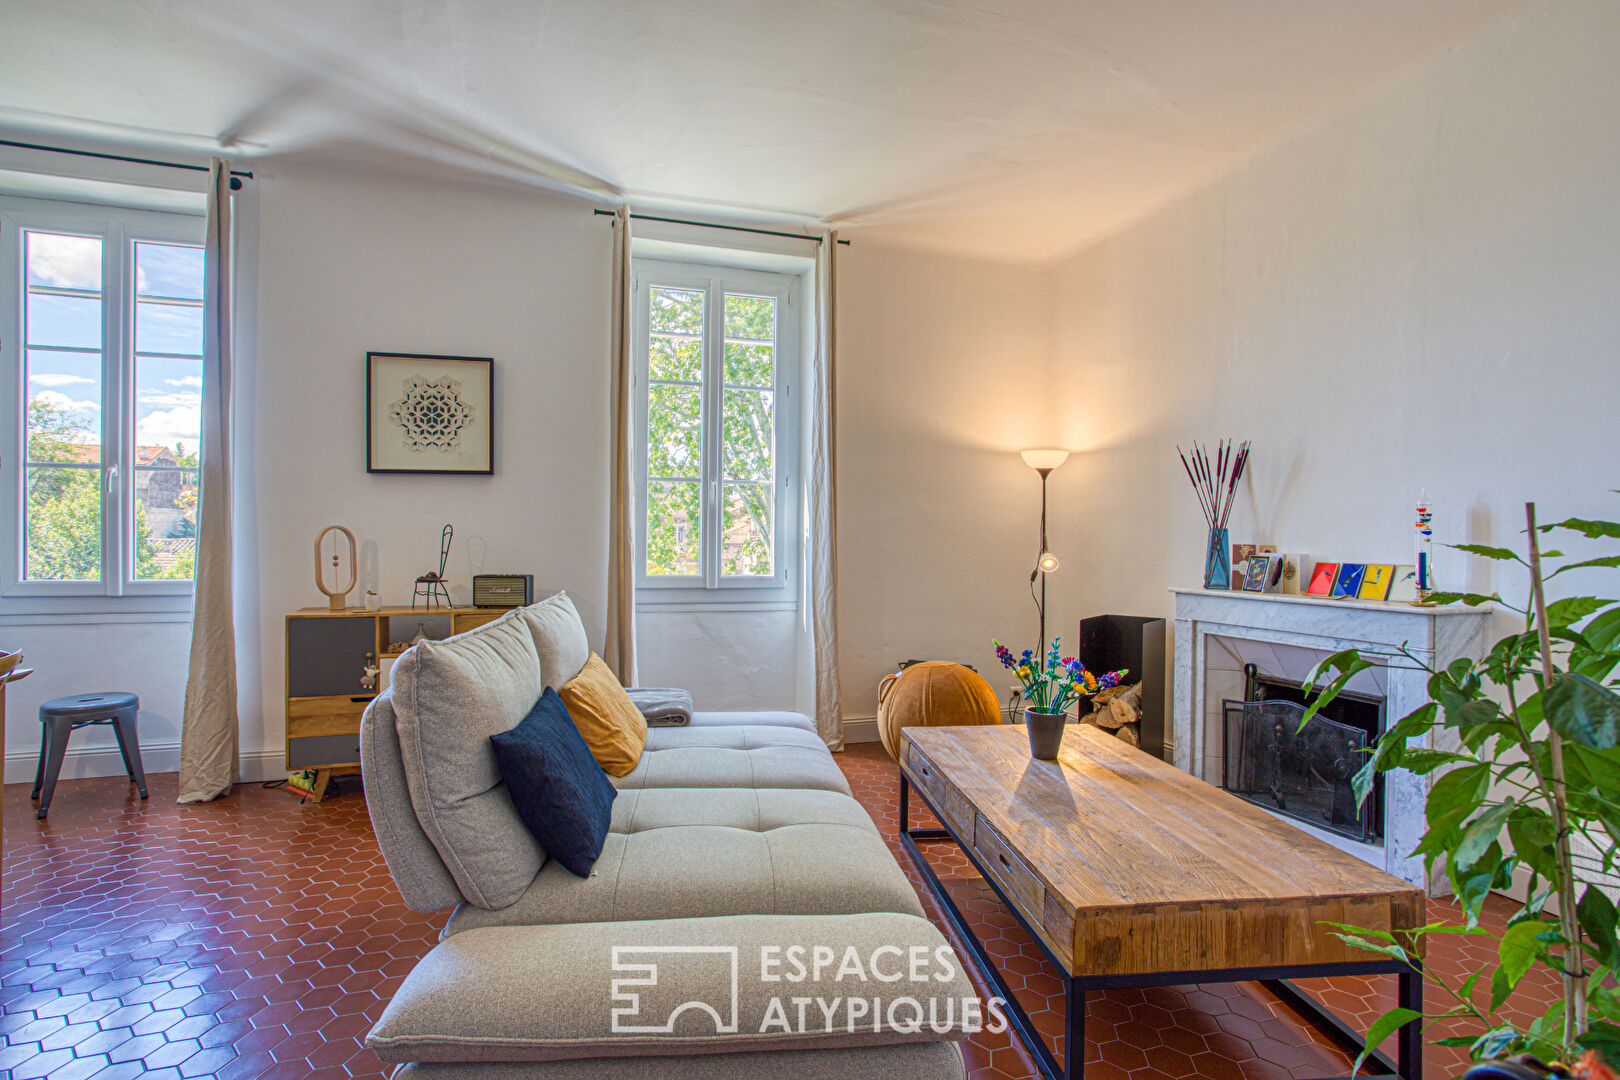 Haussmannian apartment in the heart of the city